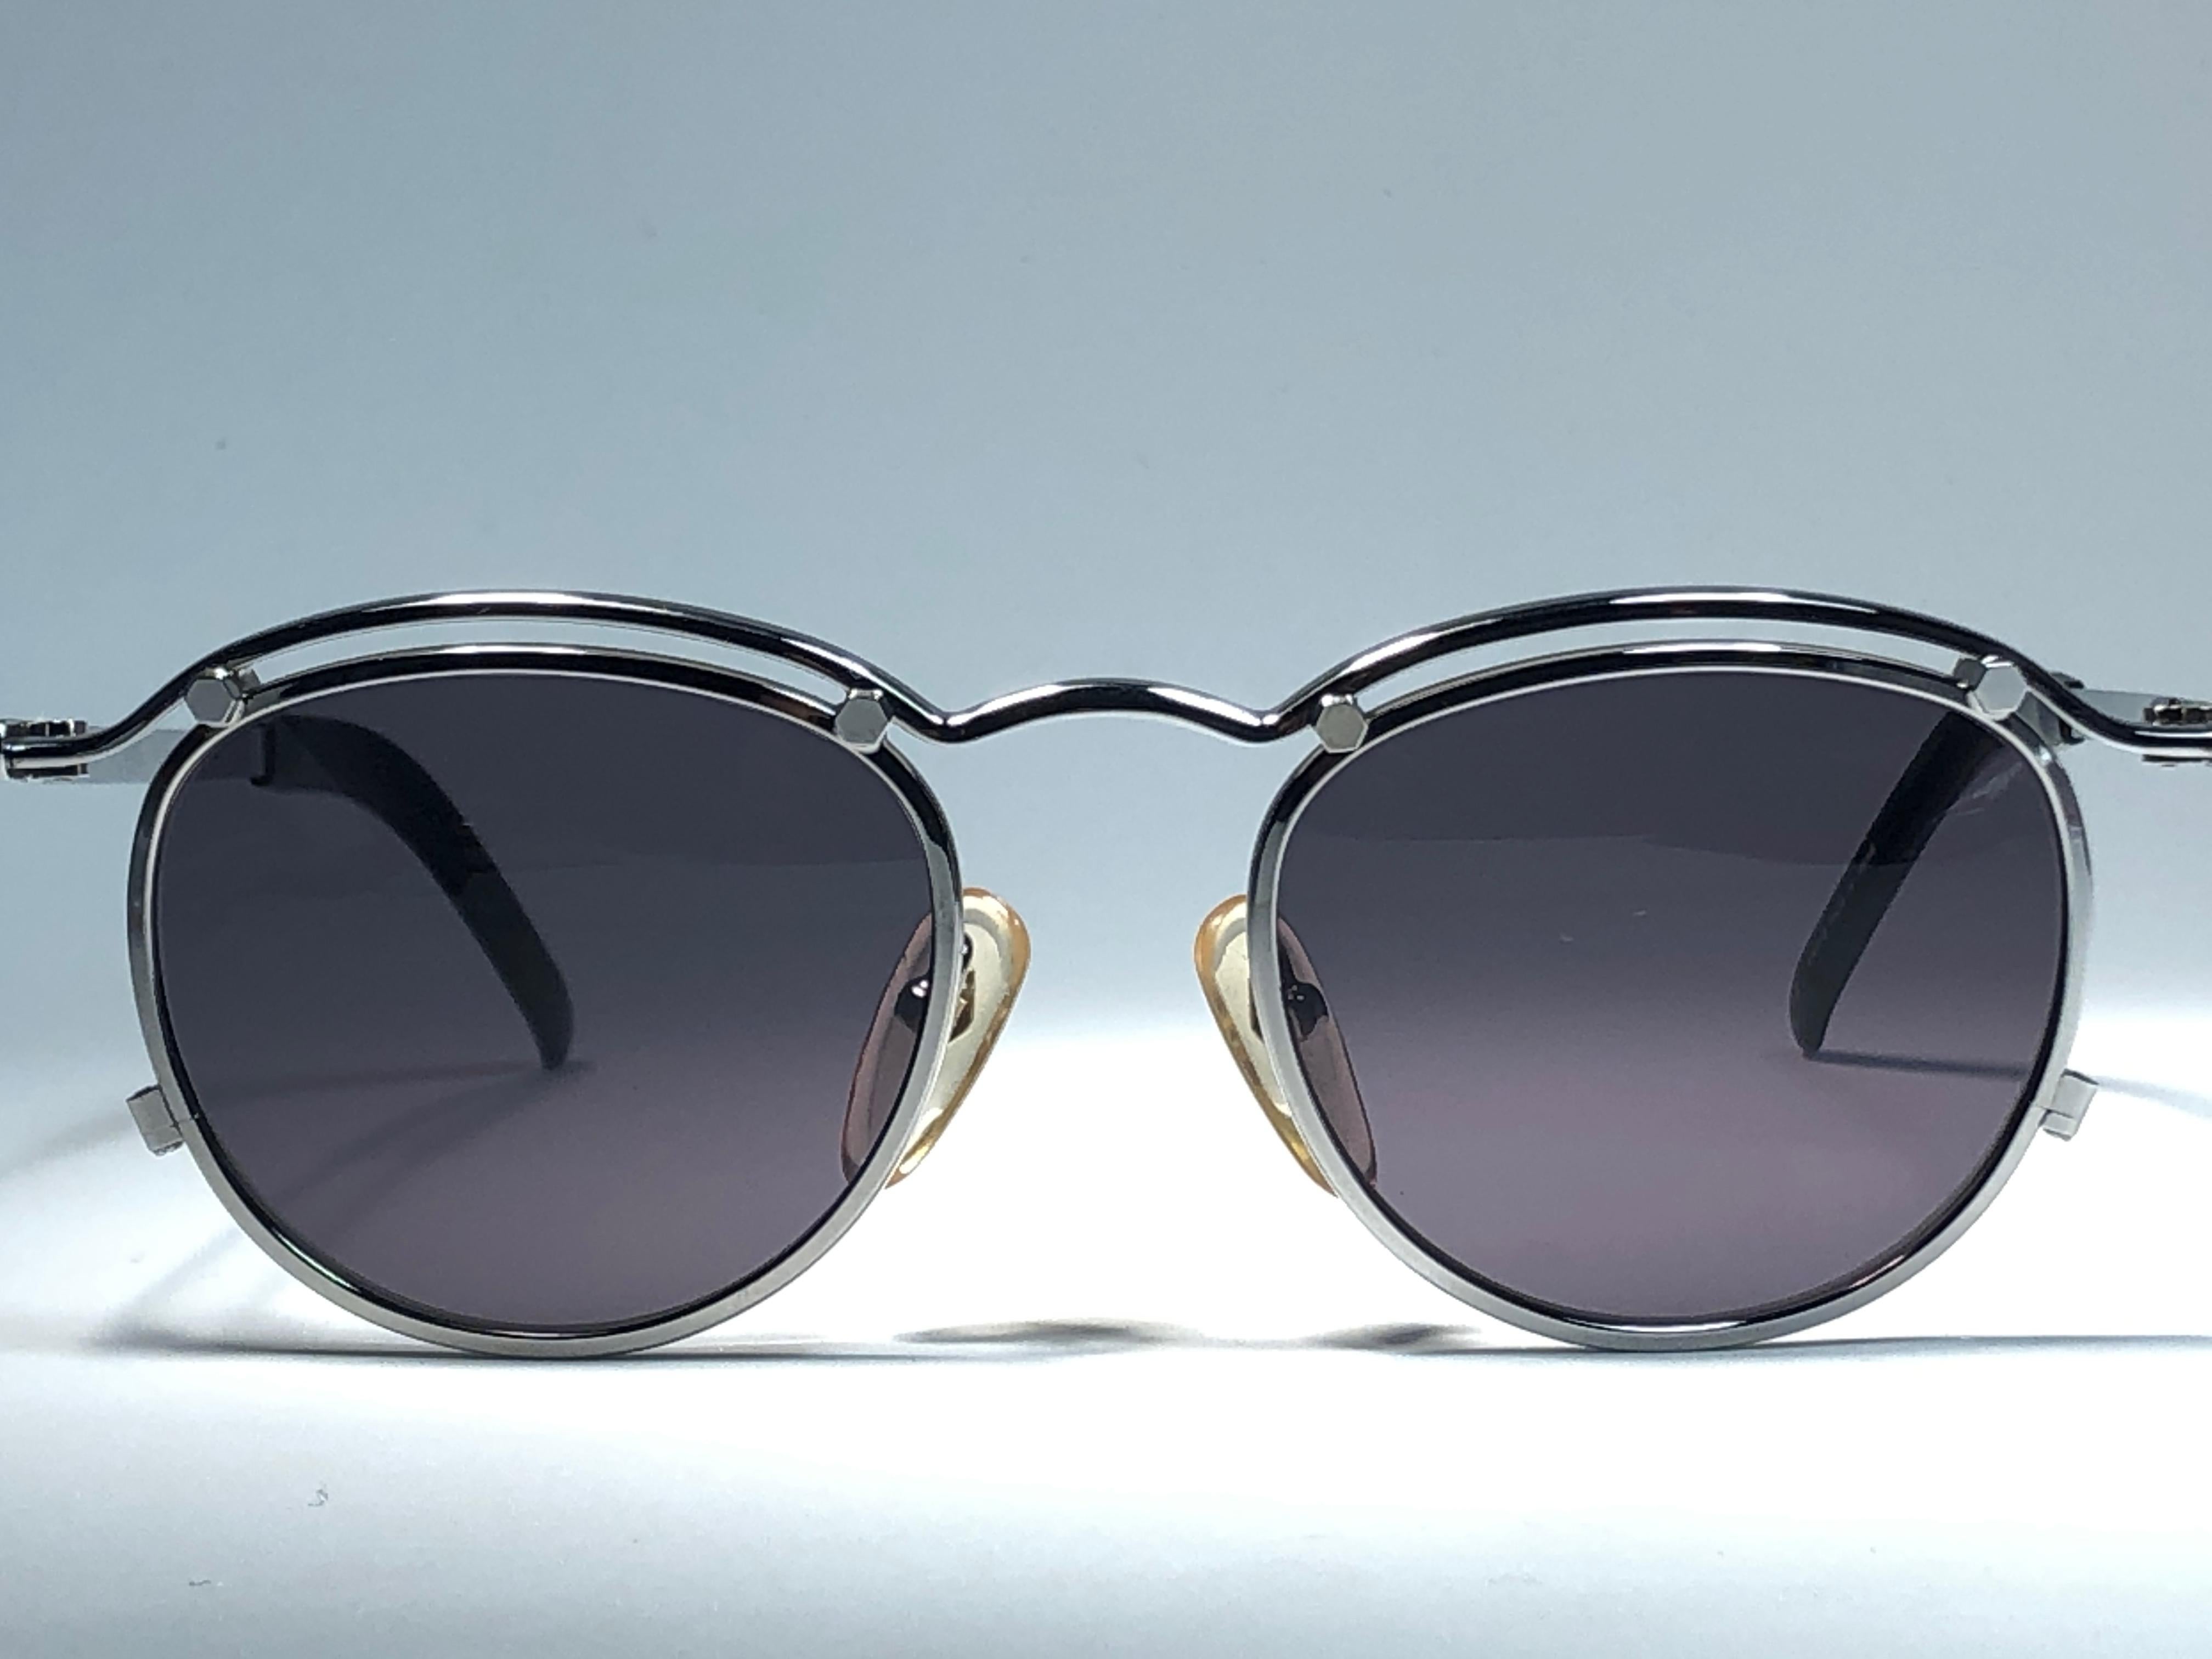 
New Jean Paul Gaultier 56 8171 round gold matte frame. 
Flat smoke grey lenses that complete a ready to wear JPG look.

Amazing design with strong yet intricate details.
Design and produced in the 1900's.
New, never worn or displayed. 
The item may